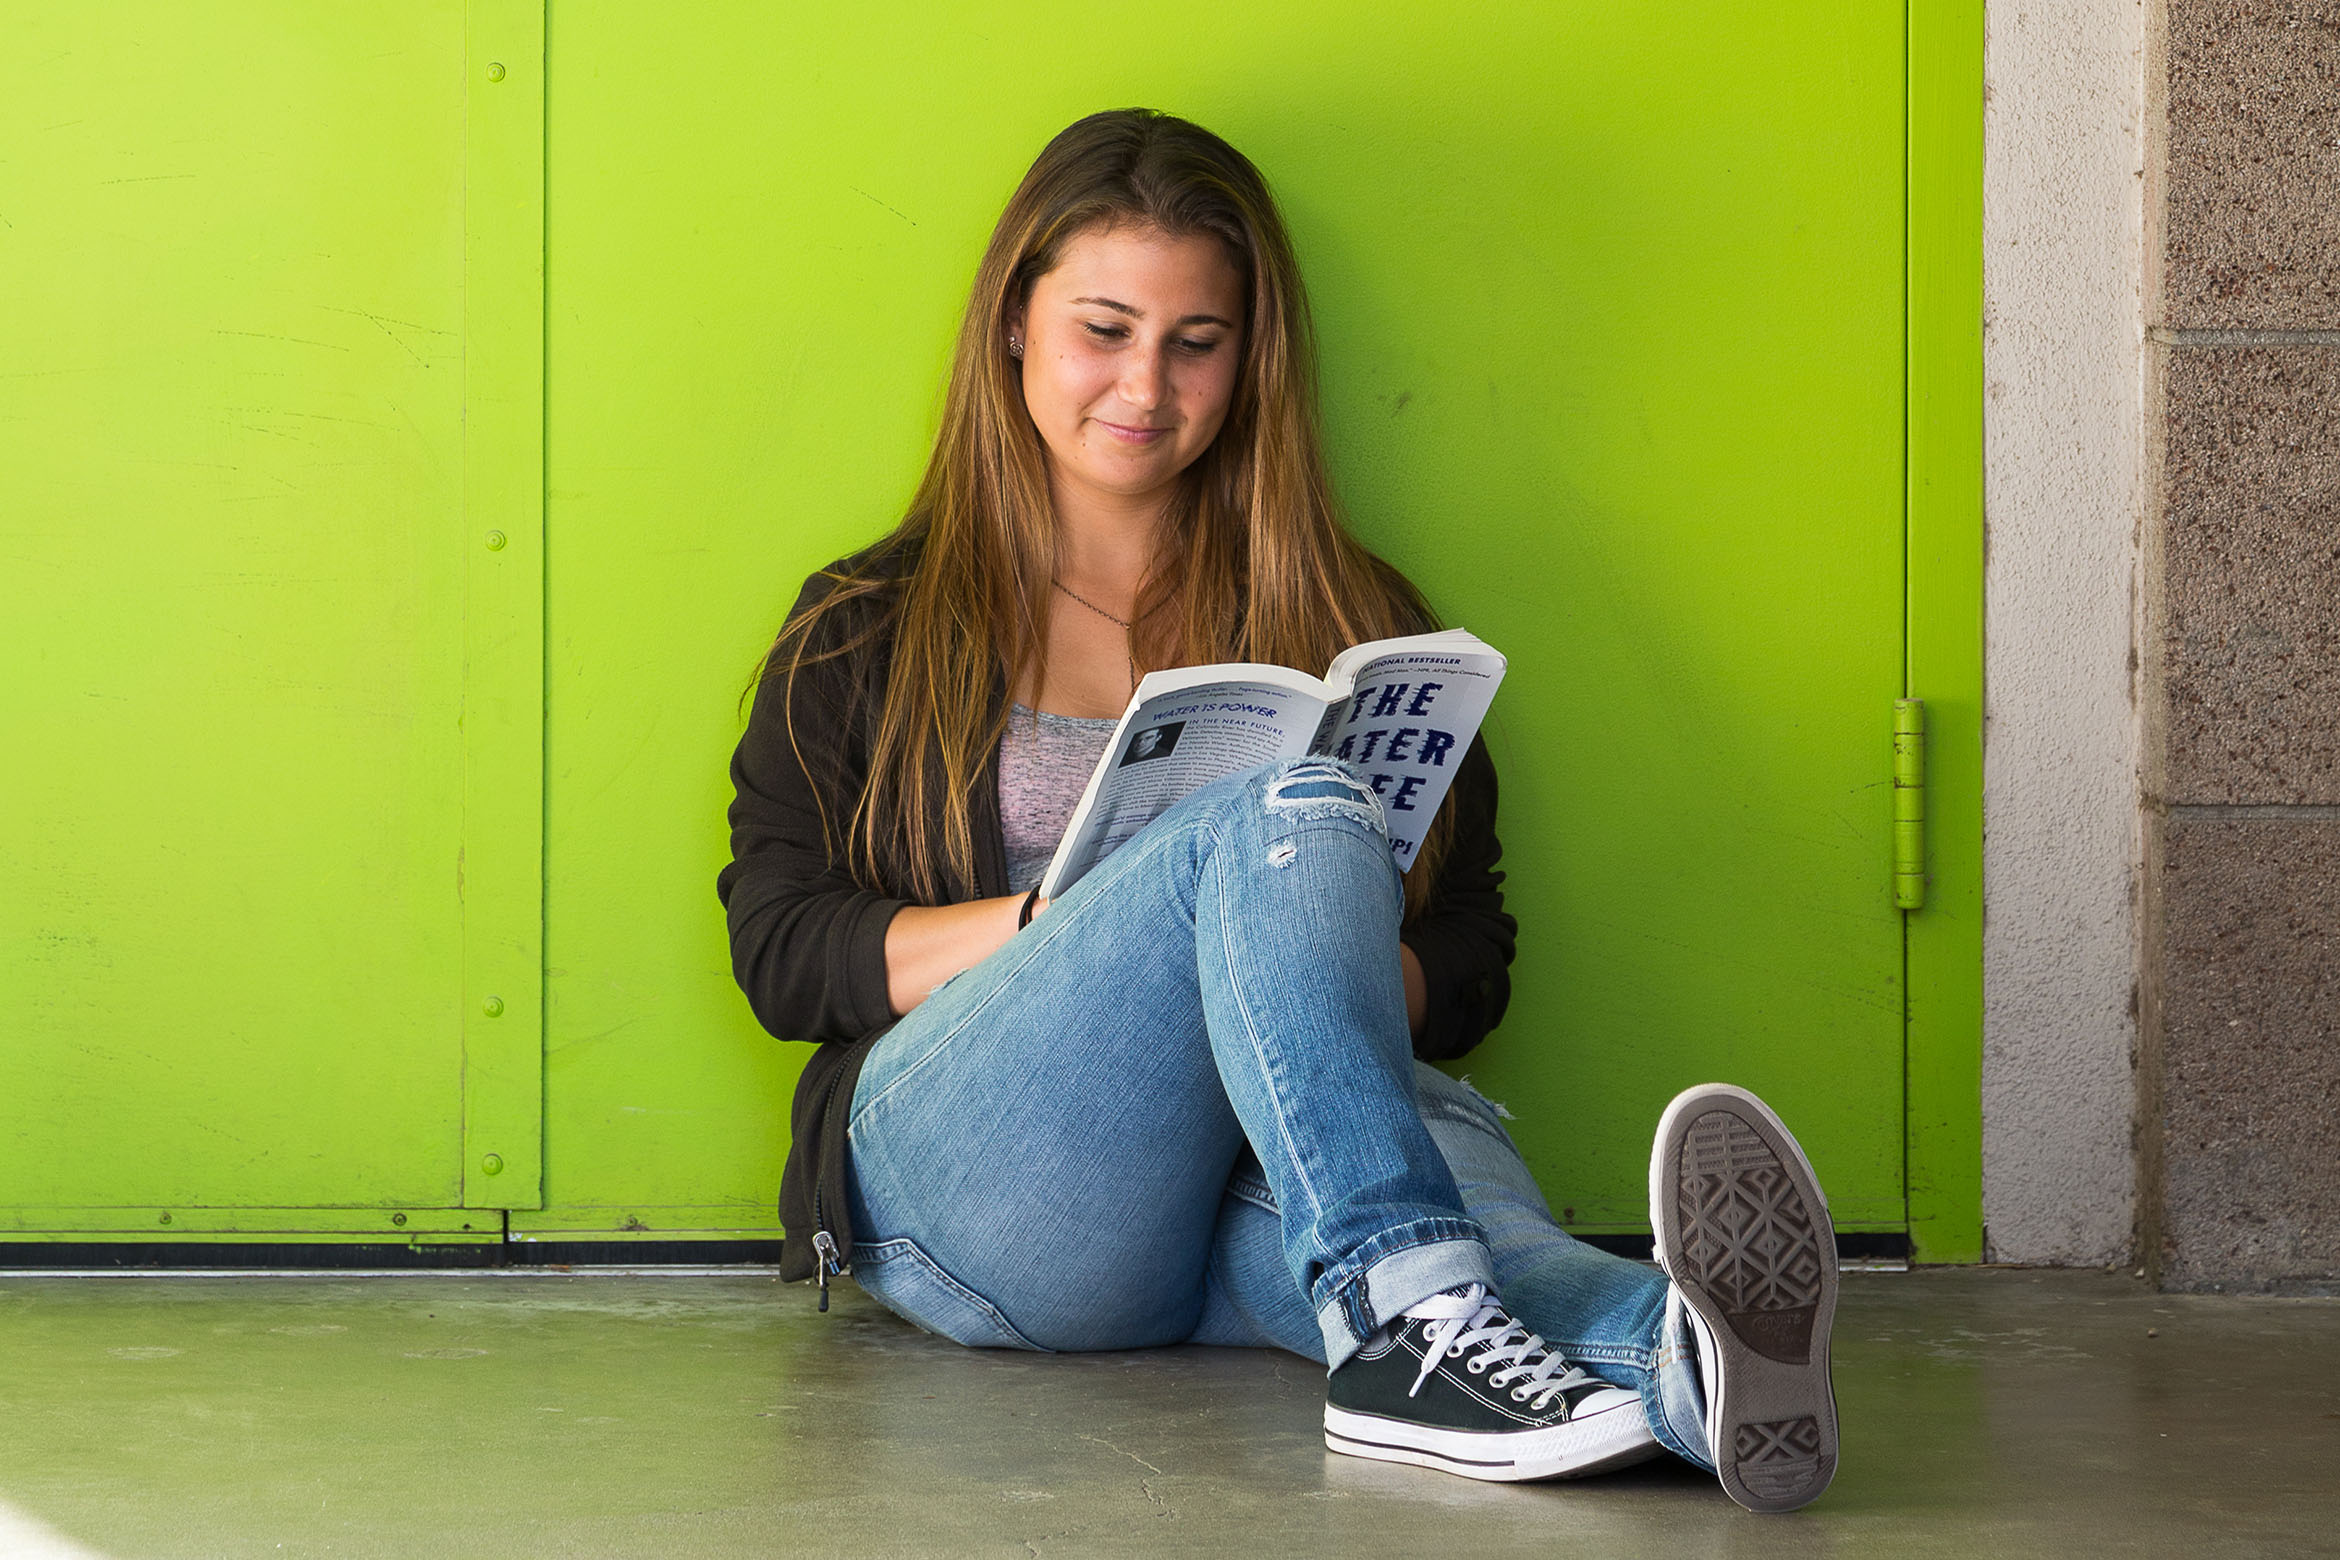 This is a student reading a book against a green wall.